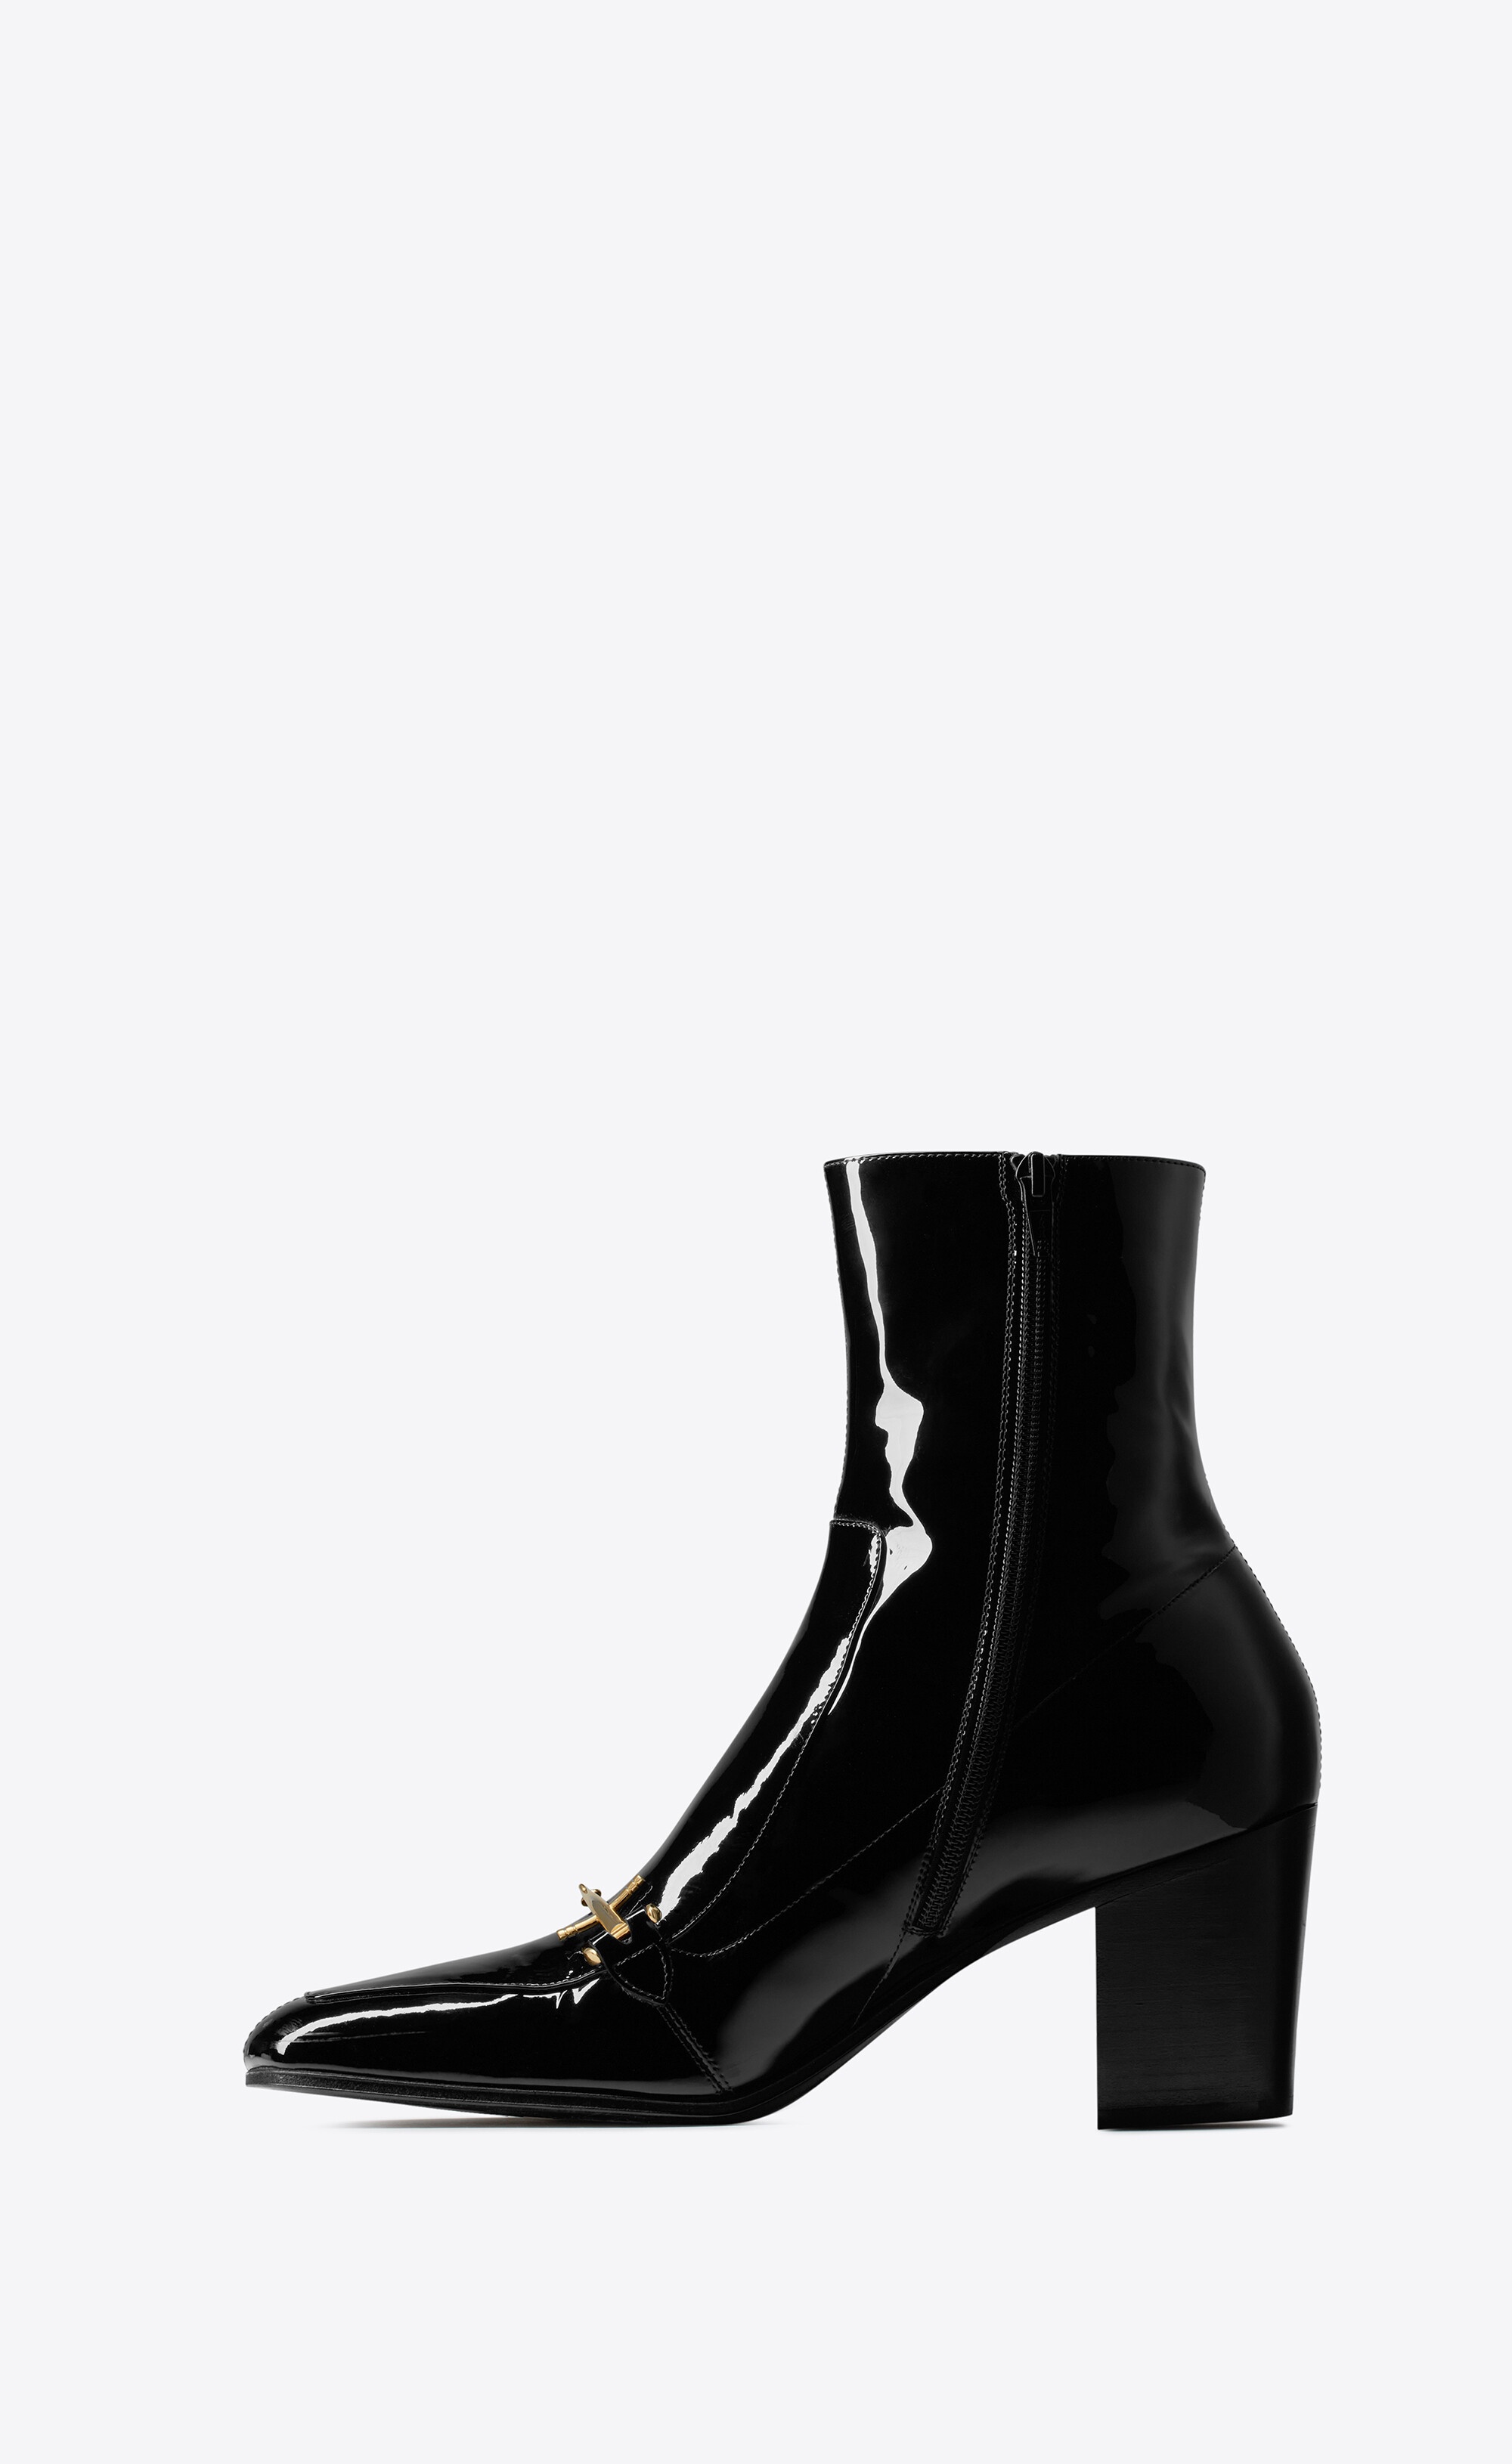 beau boots in patent leather - 4